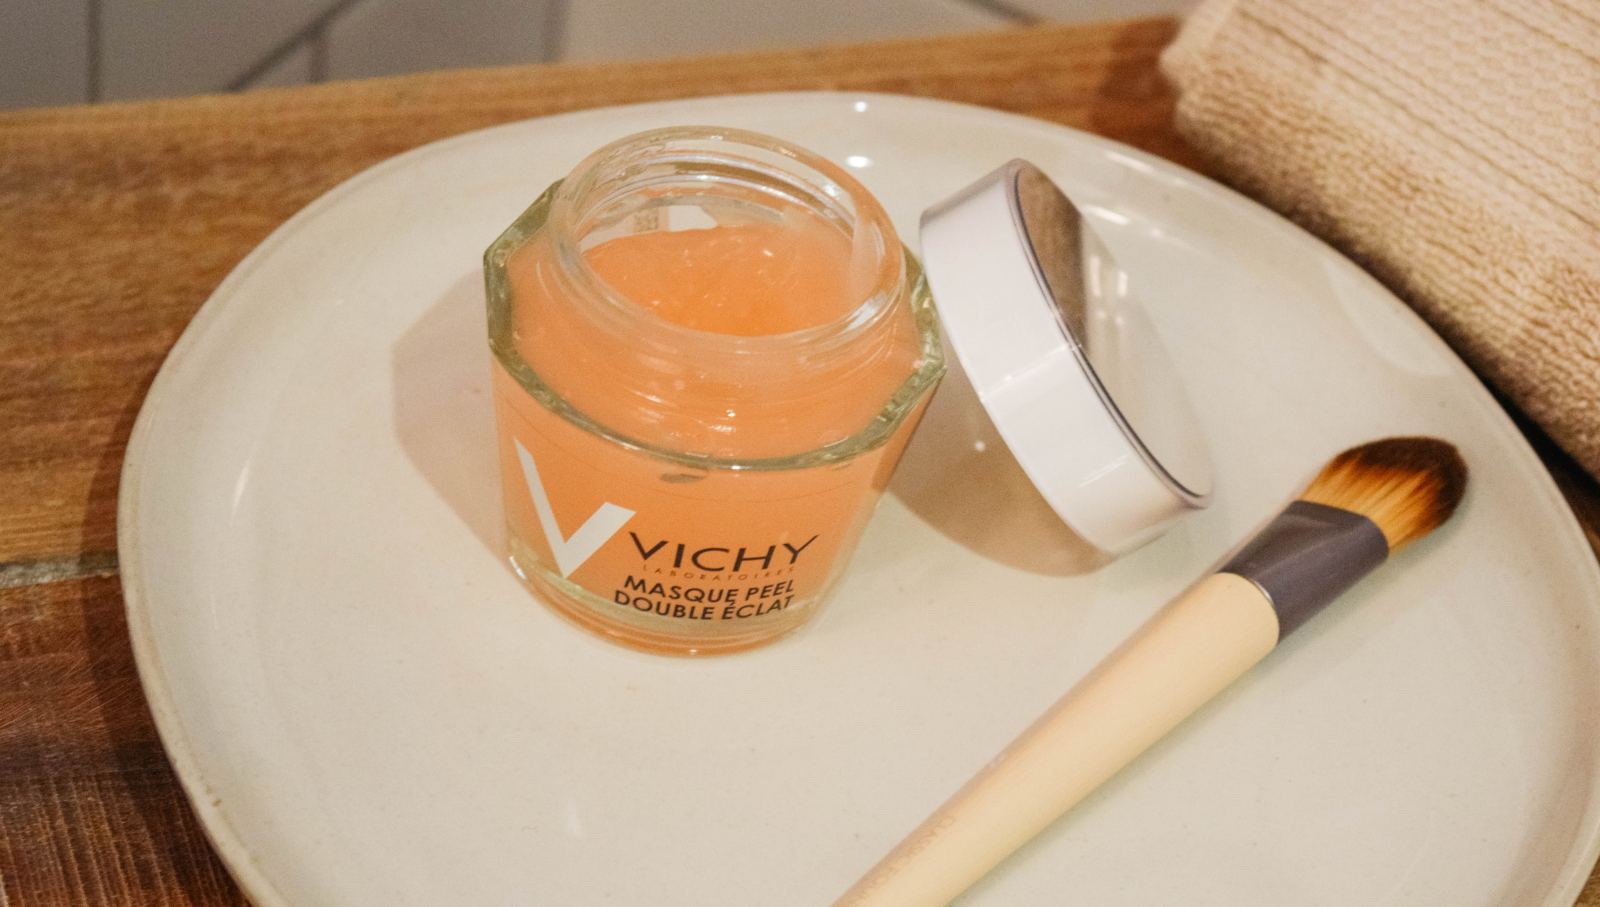 VICHY, VICHY skincare, french skincare, skincare, vichy masque, masque peel double eclat, face mask, vichy face mask, ecotools, ecotools synthetic brush, natural skincare